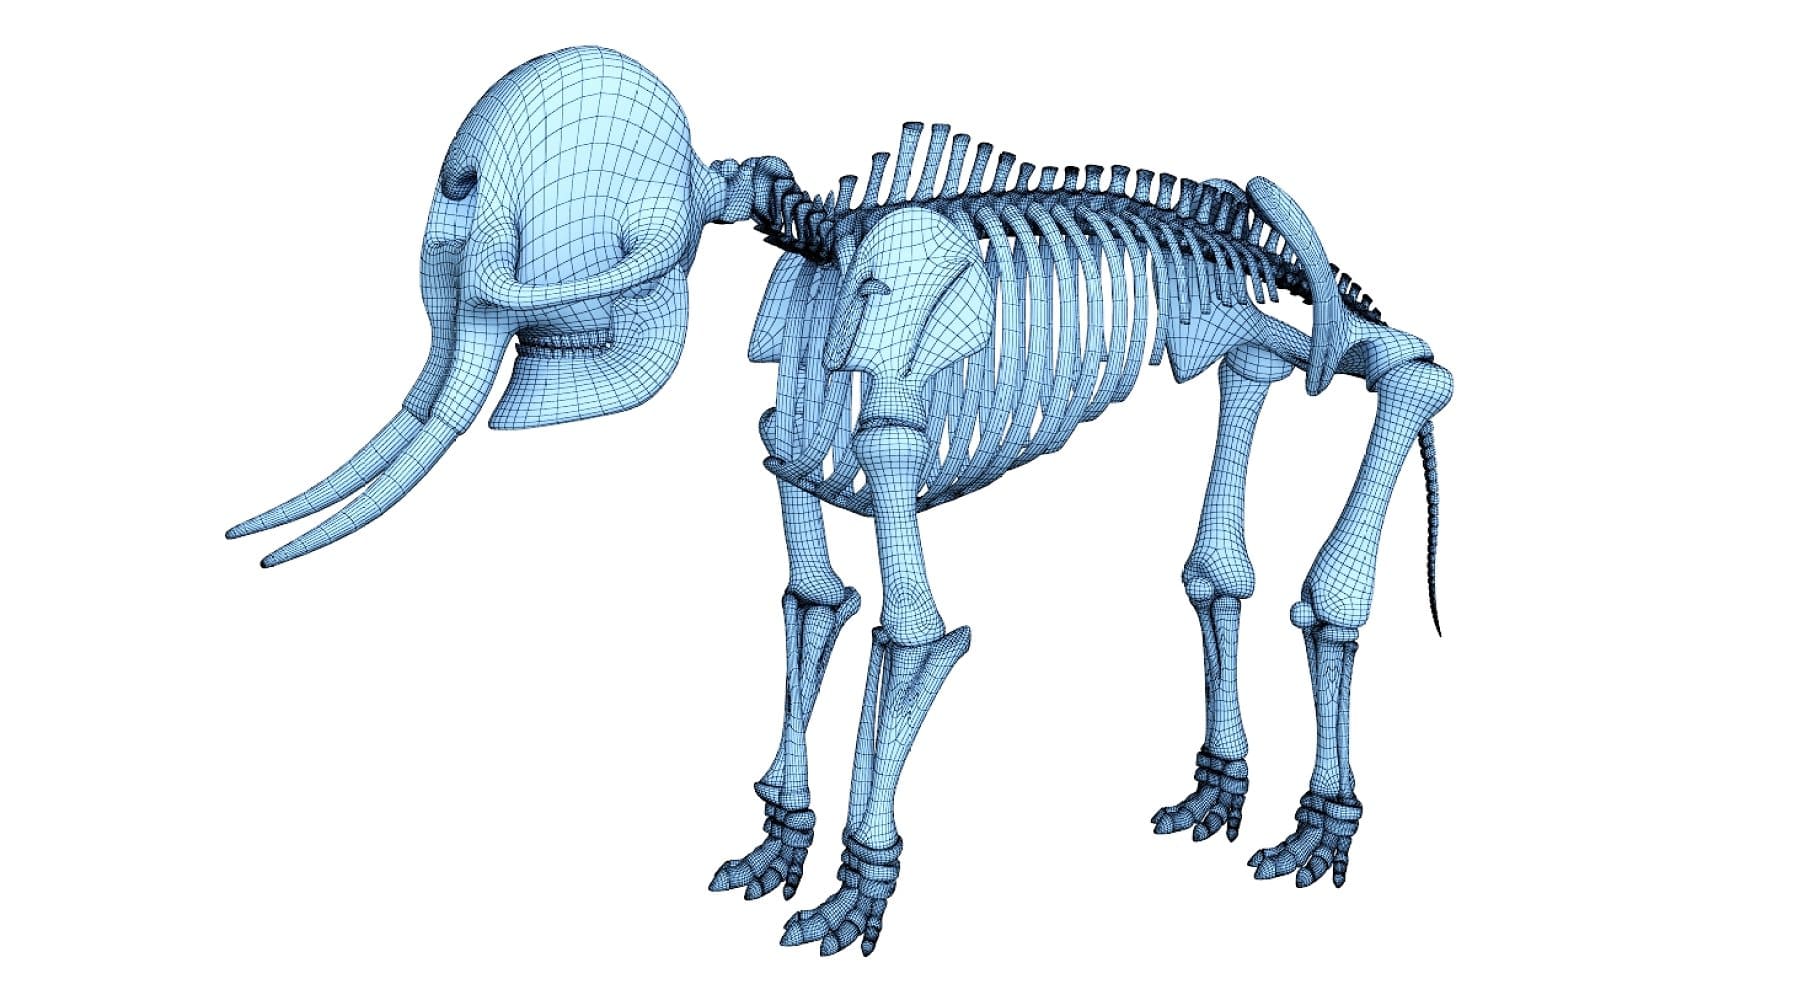 Image of a 3D model of an elephant consisting of small squares.